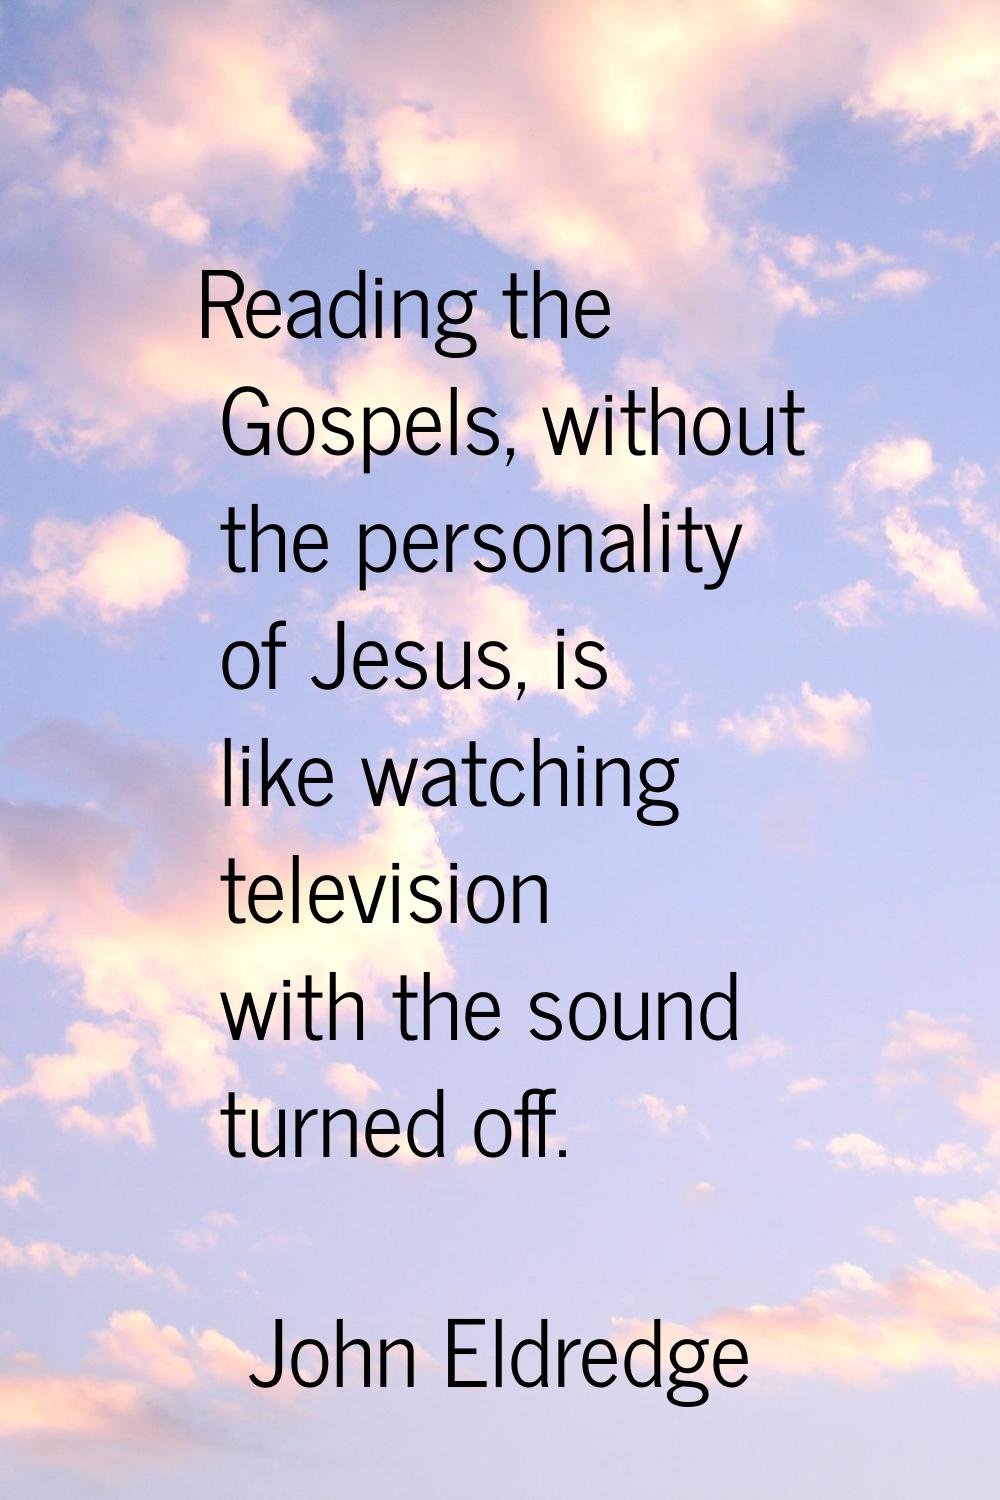 Reading the Gospels, without the personality of Jesus, is like watching television with the sound t